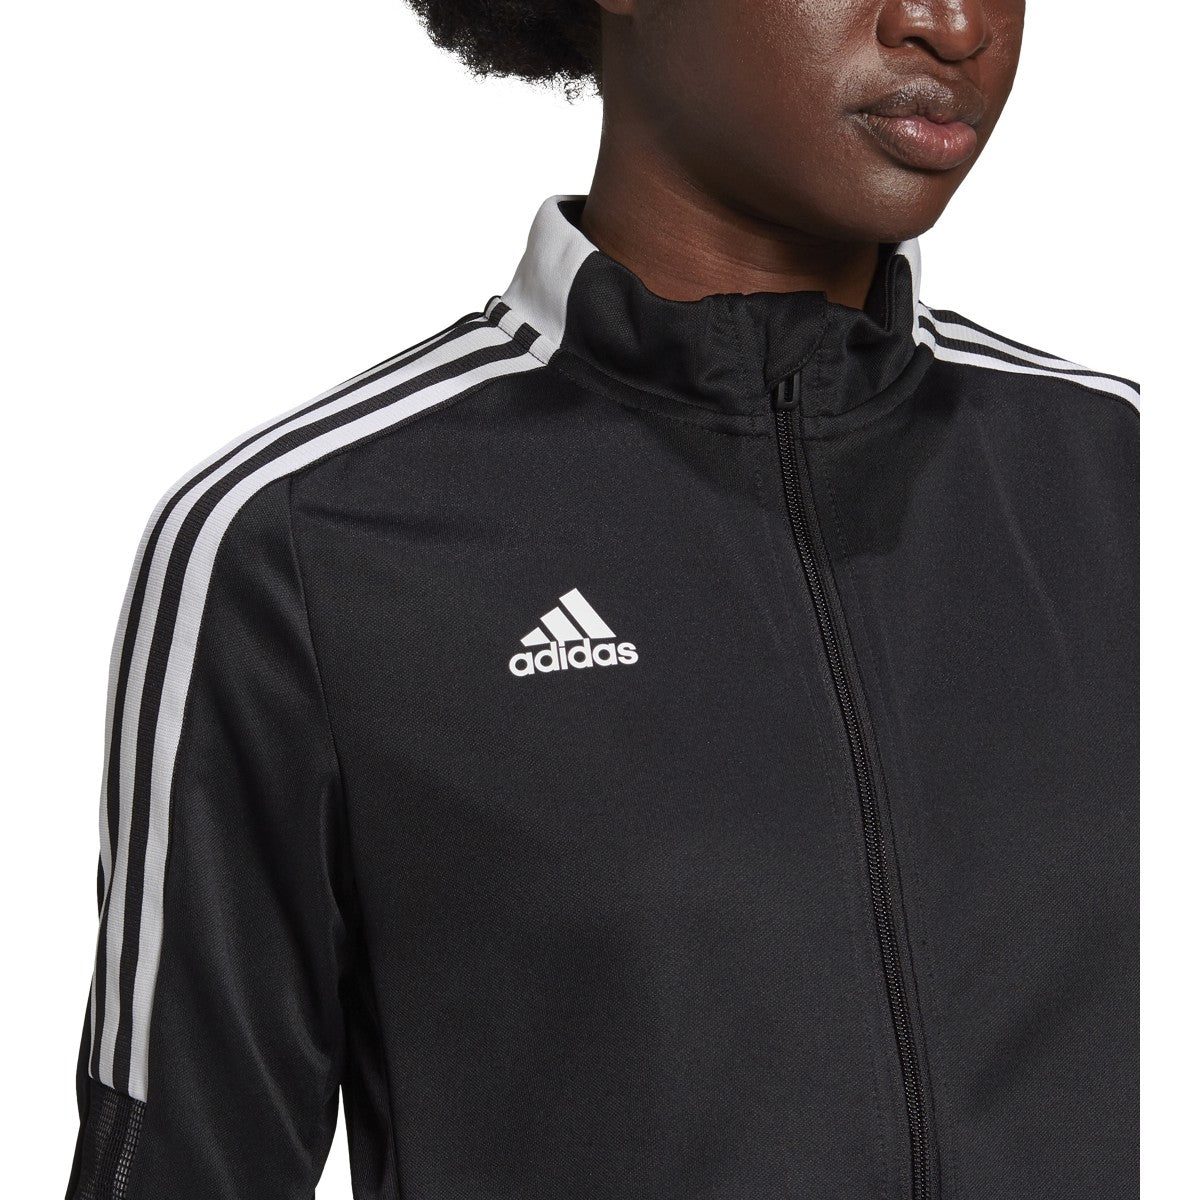 Adidas Track Jacket Womens Stay In The Game Long Sleeve Full Zipper Front  Top | eBay